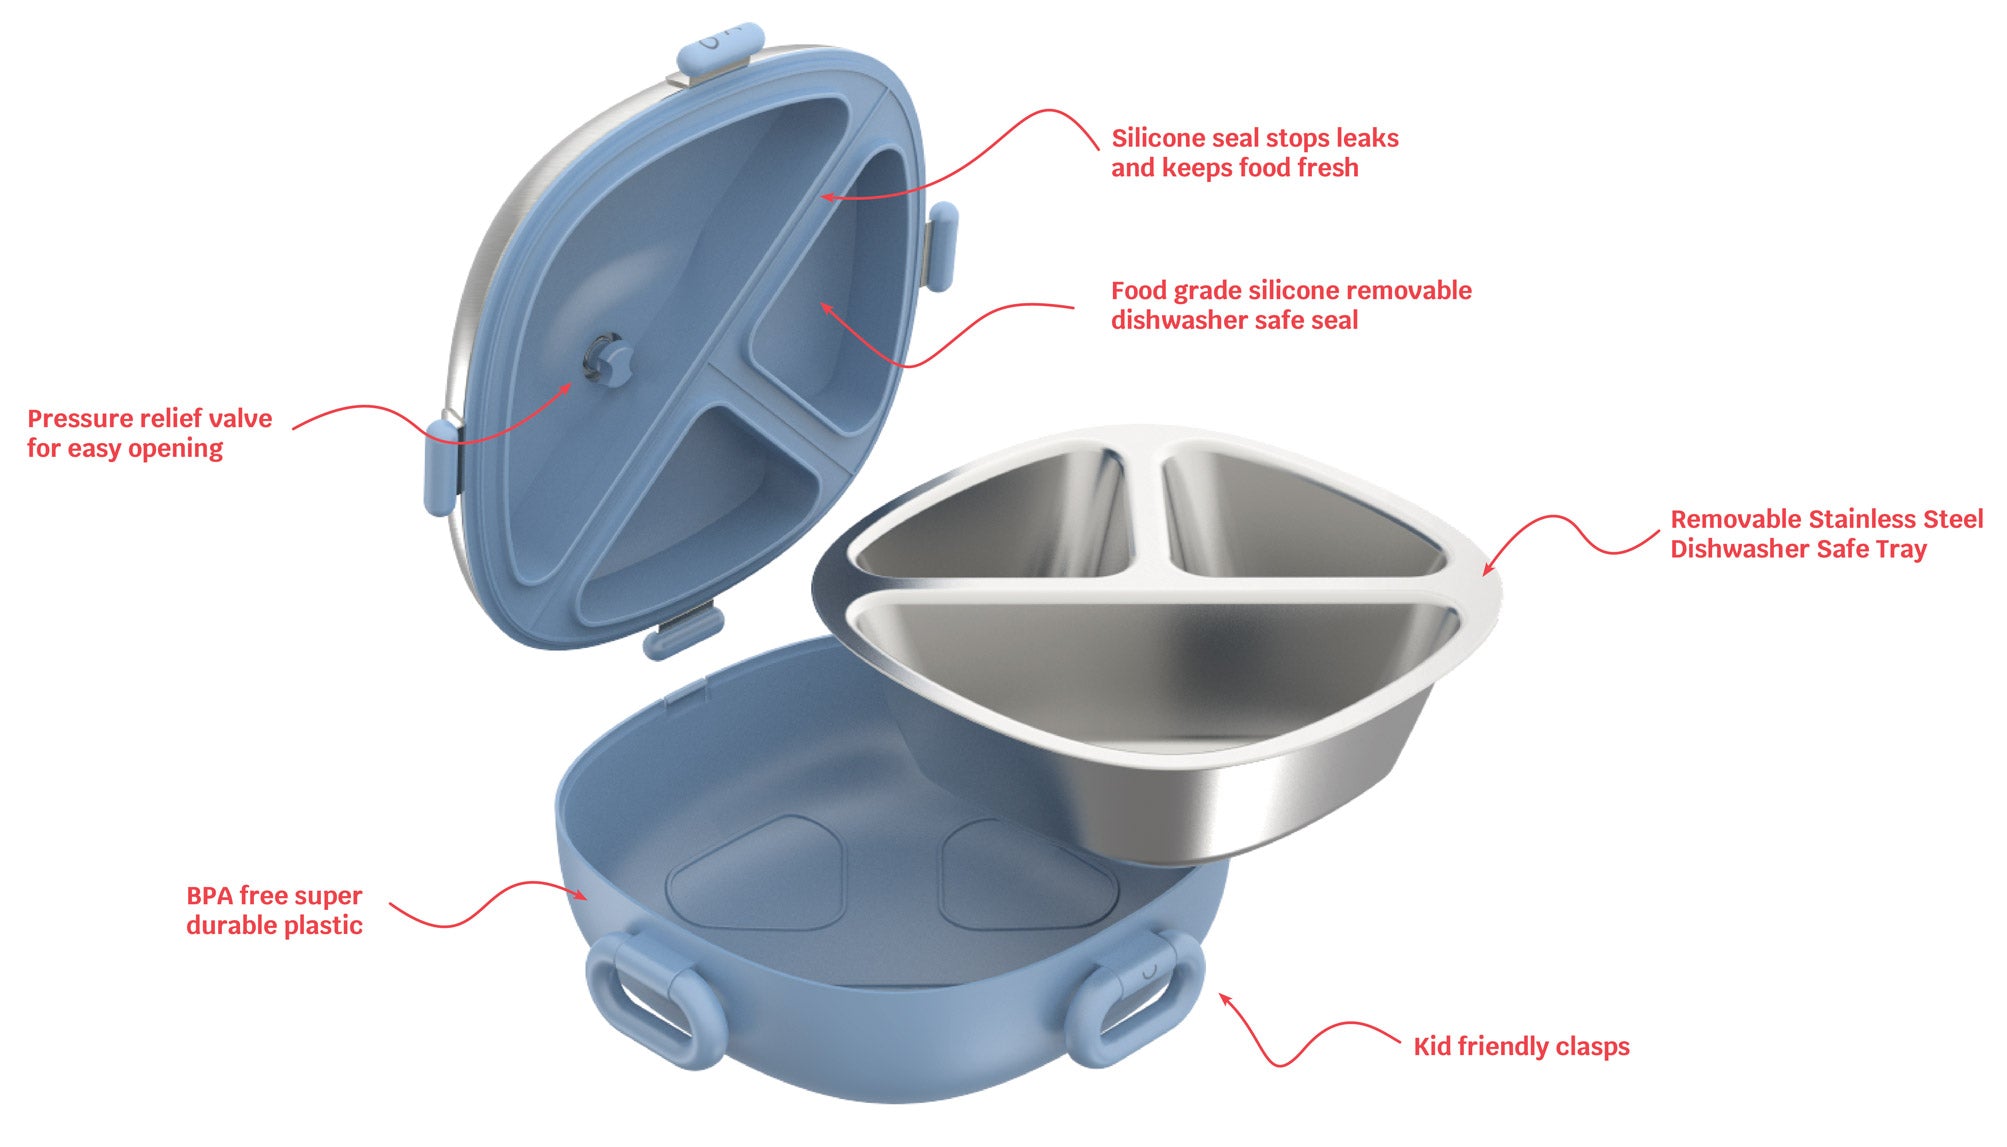 Exploded view of a Winck Bento Lunch Box highlighting its features: a pressure relief valve for easy opening, a silicone seal to stop leaks and keep food fresh, a food-grade silicone removable dishwasher safe seal, BPA-free durable plastic construction, and kid-friendly clasps, with a removable stainless steel tray also suitable for the dishwasher.